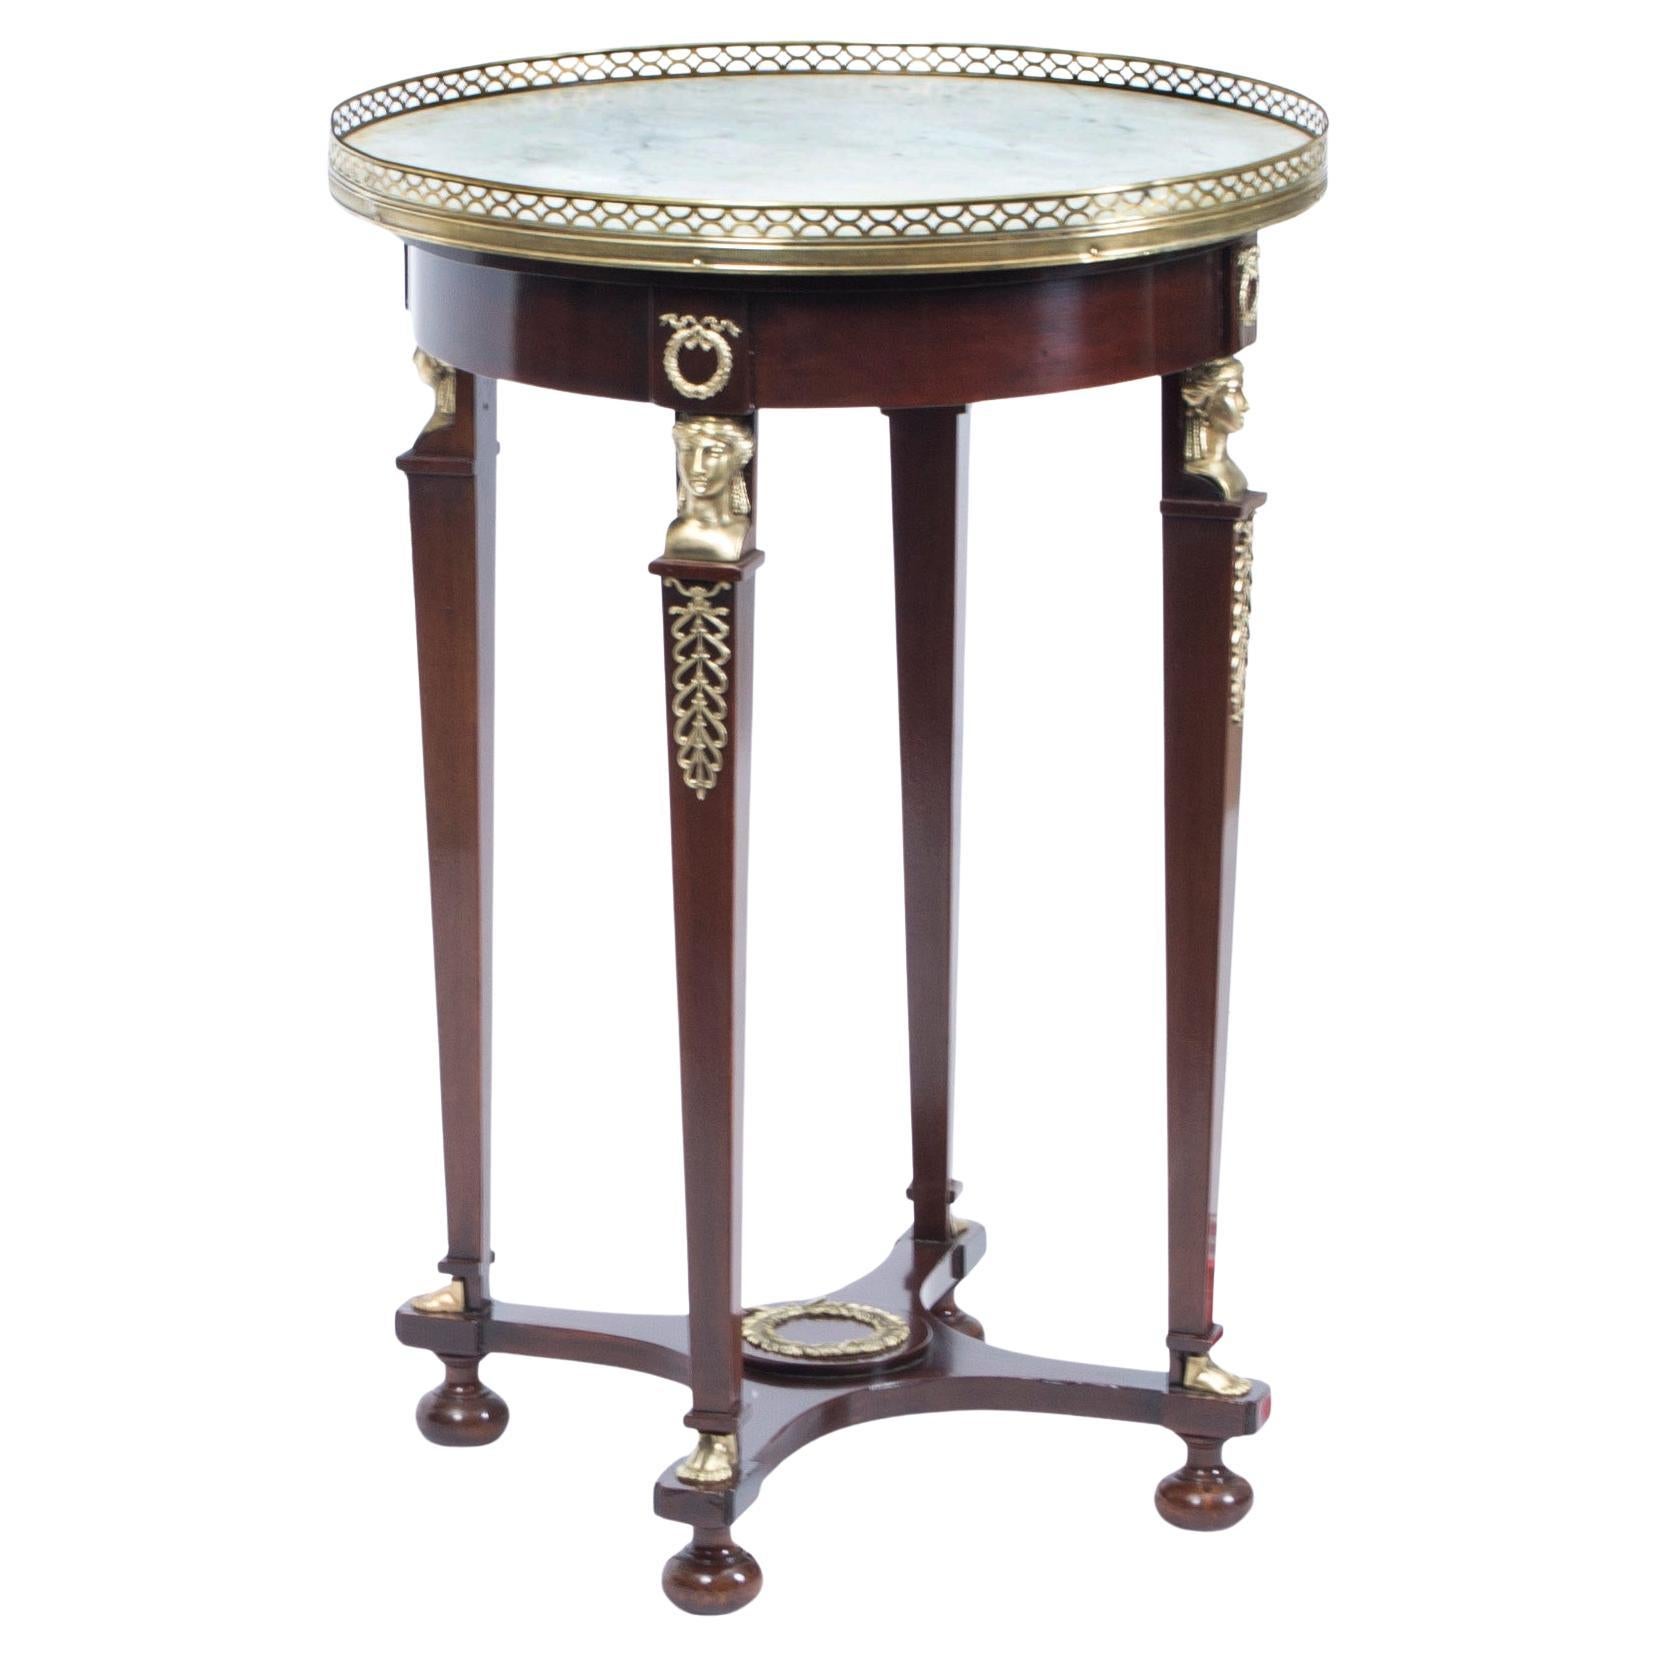 Antique French Empire Marble & Ormolu Occasional Table 19th Century